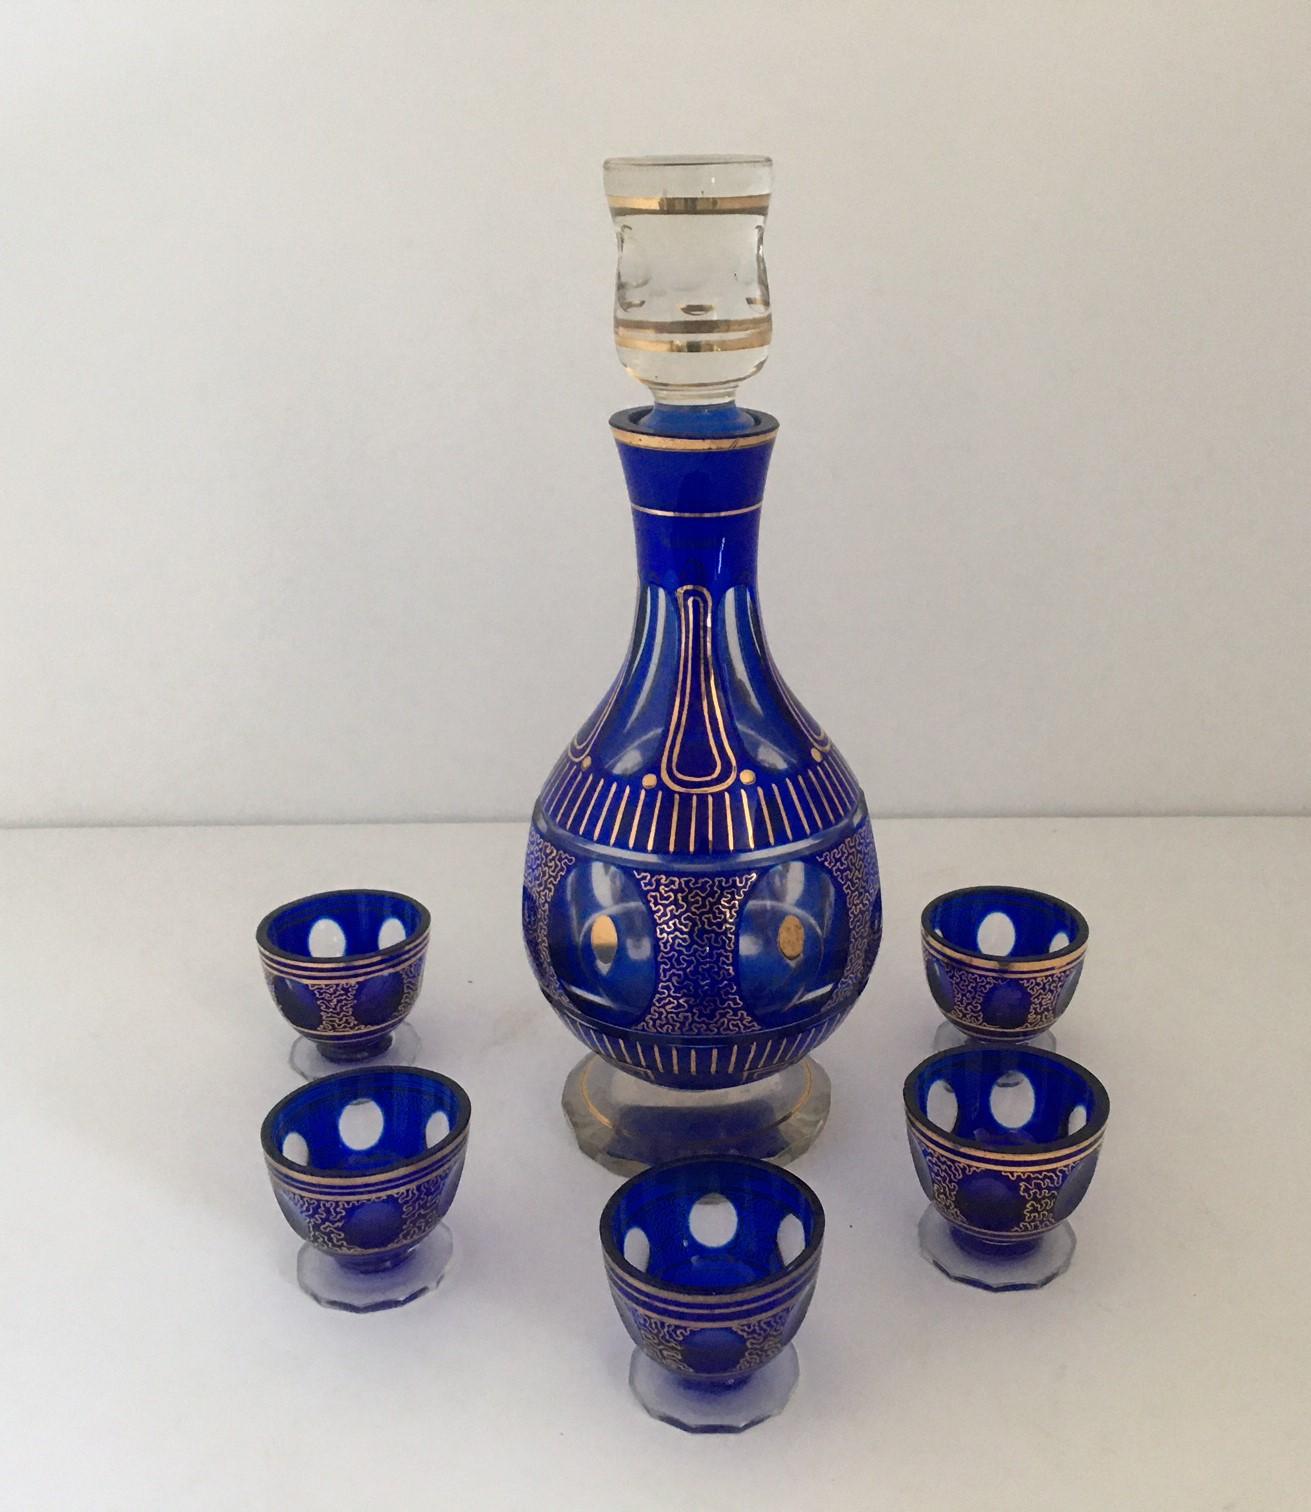 Bohemian cut crystal liqueur set decorated with dark purple glass and hand-painted in gold.
The set includes six pieces of goblets, and a one-piece decanter.
Very good condition.
Measures: Decanter 11.50